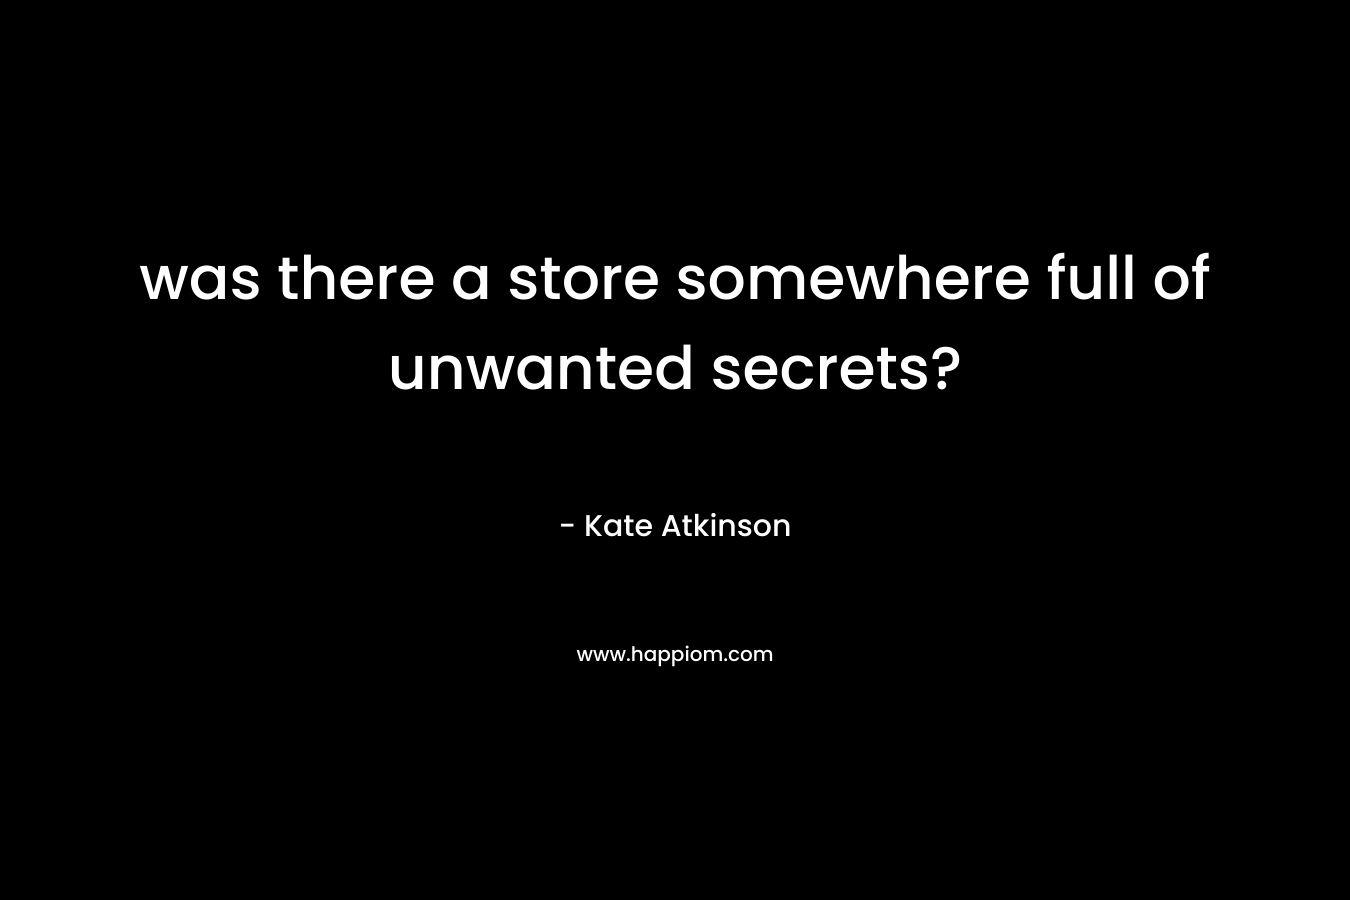 was there a store somewhere full of unwanted secrets? – Kate Atkinson